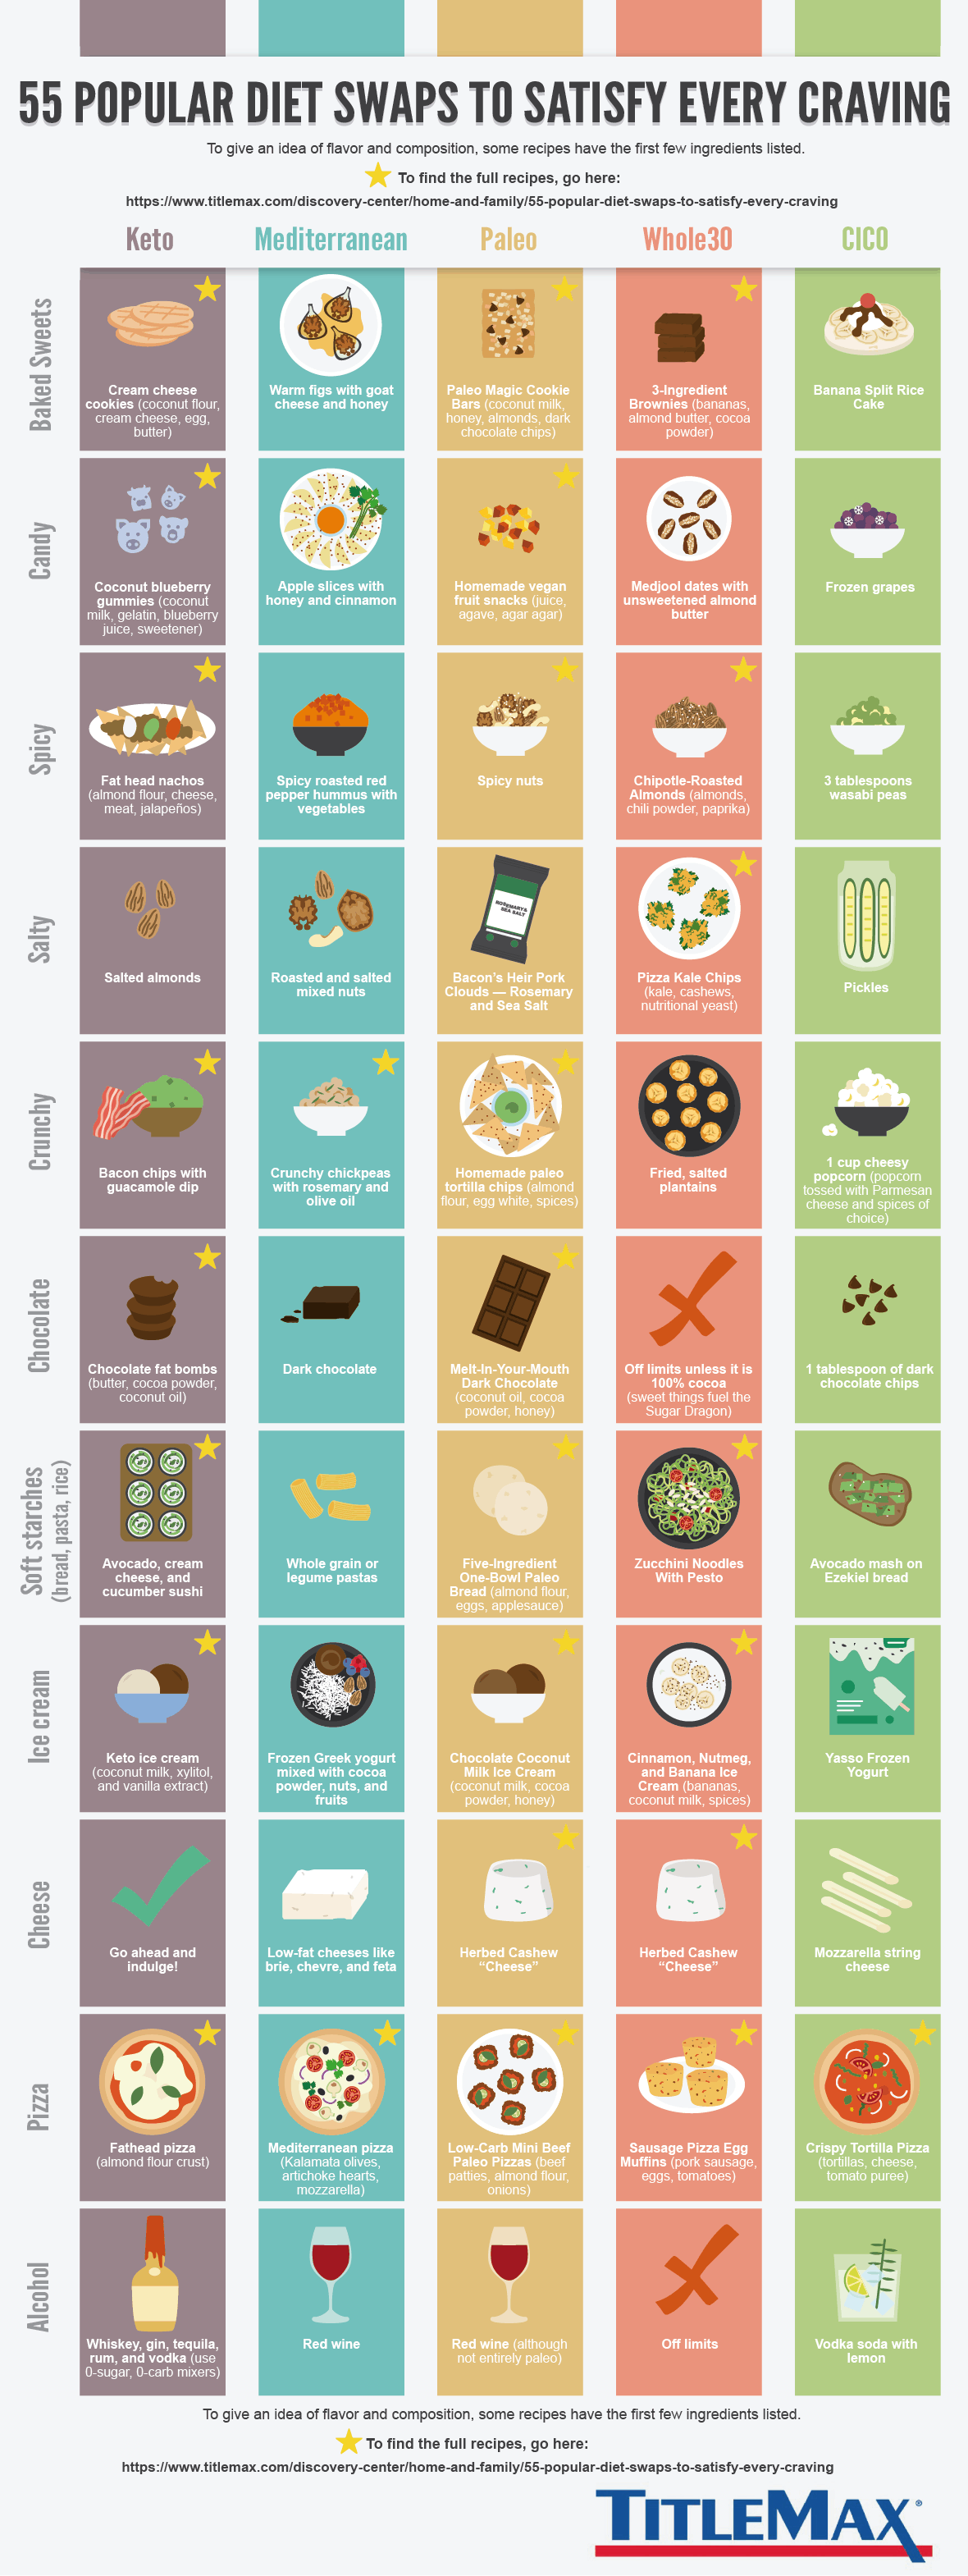 55 Popular Diet Swaps To Satisfy Every Craving